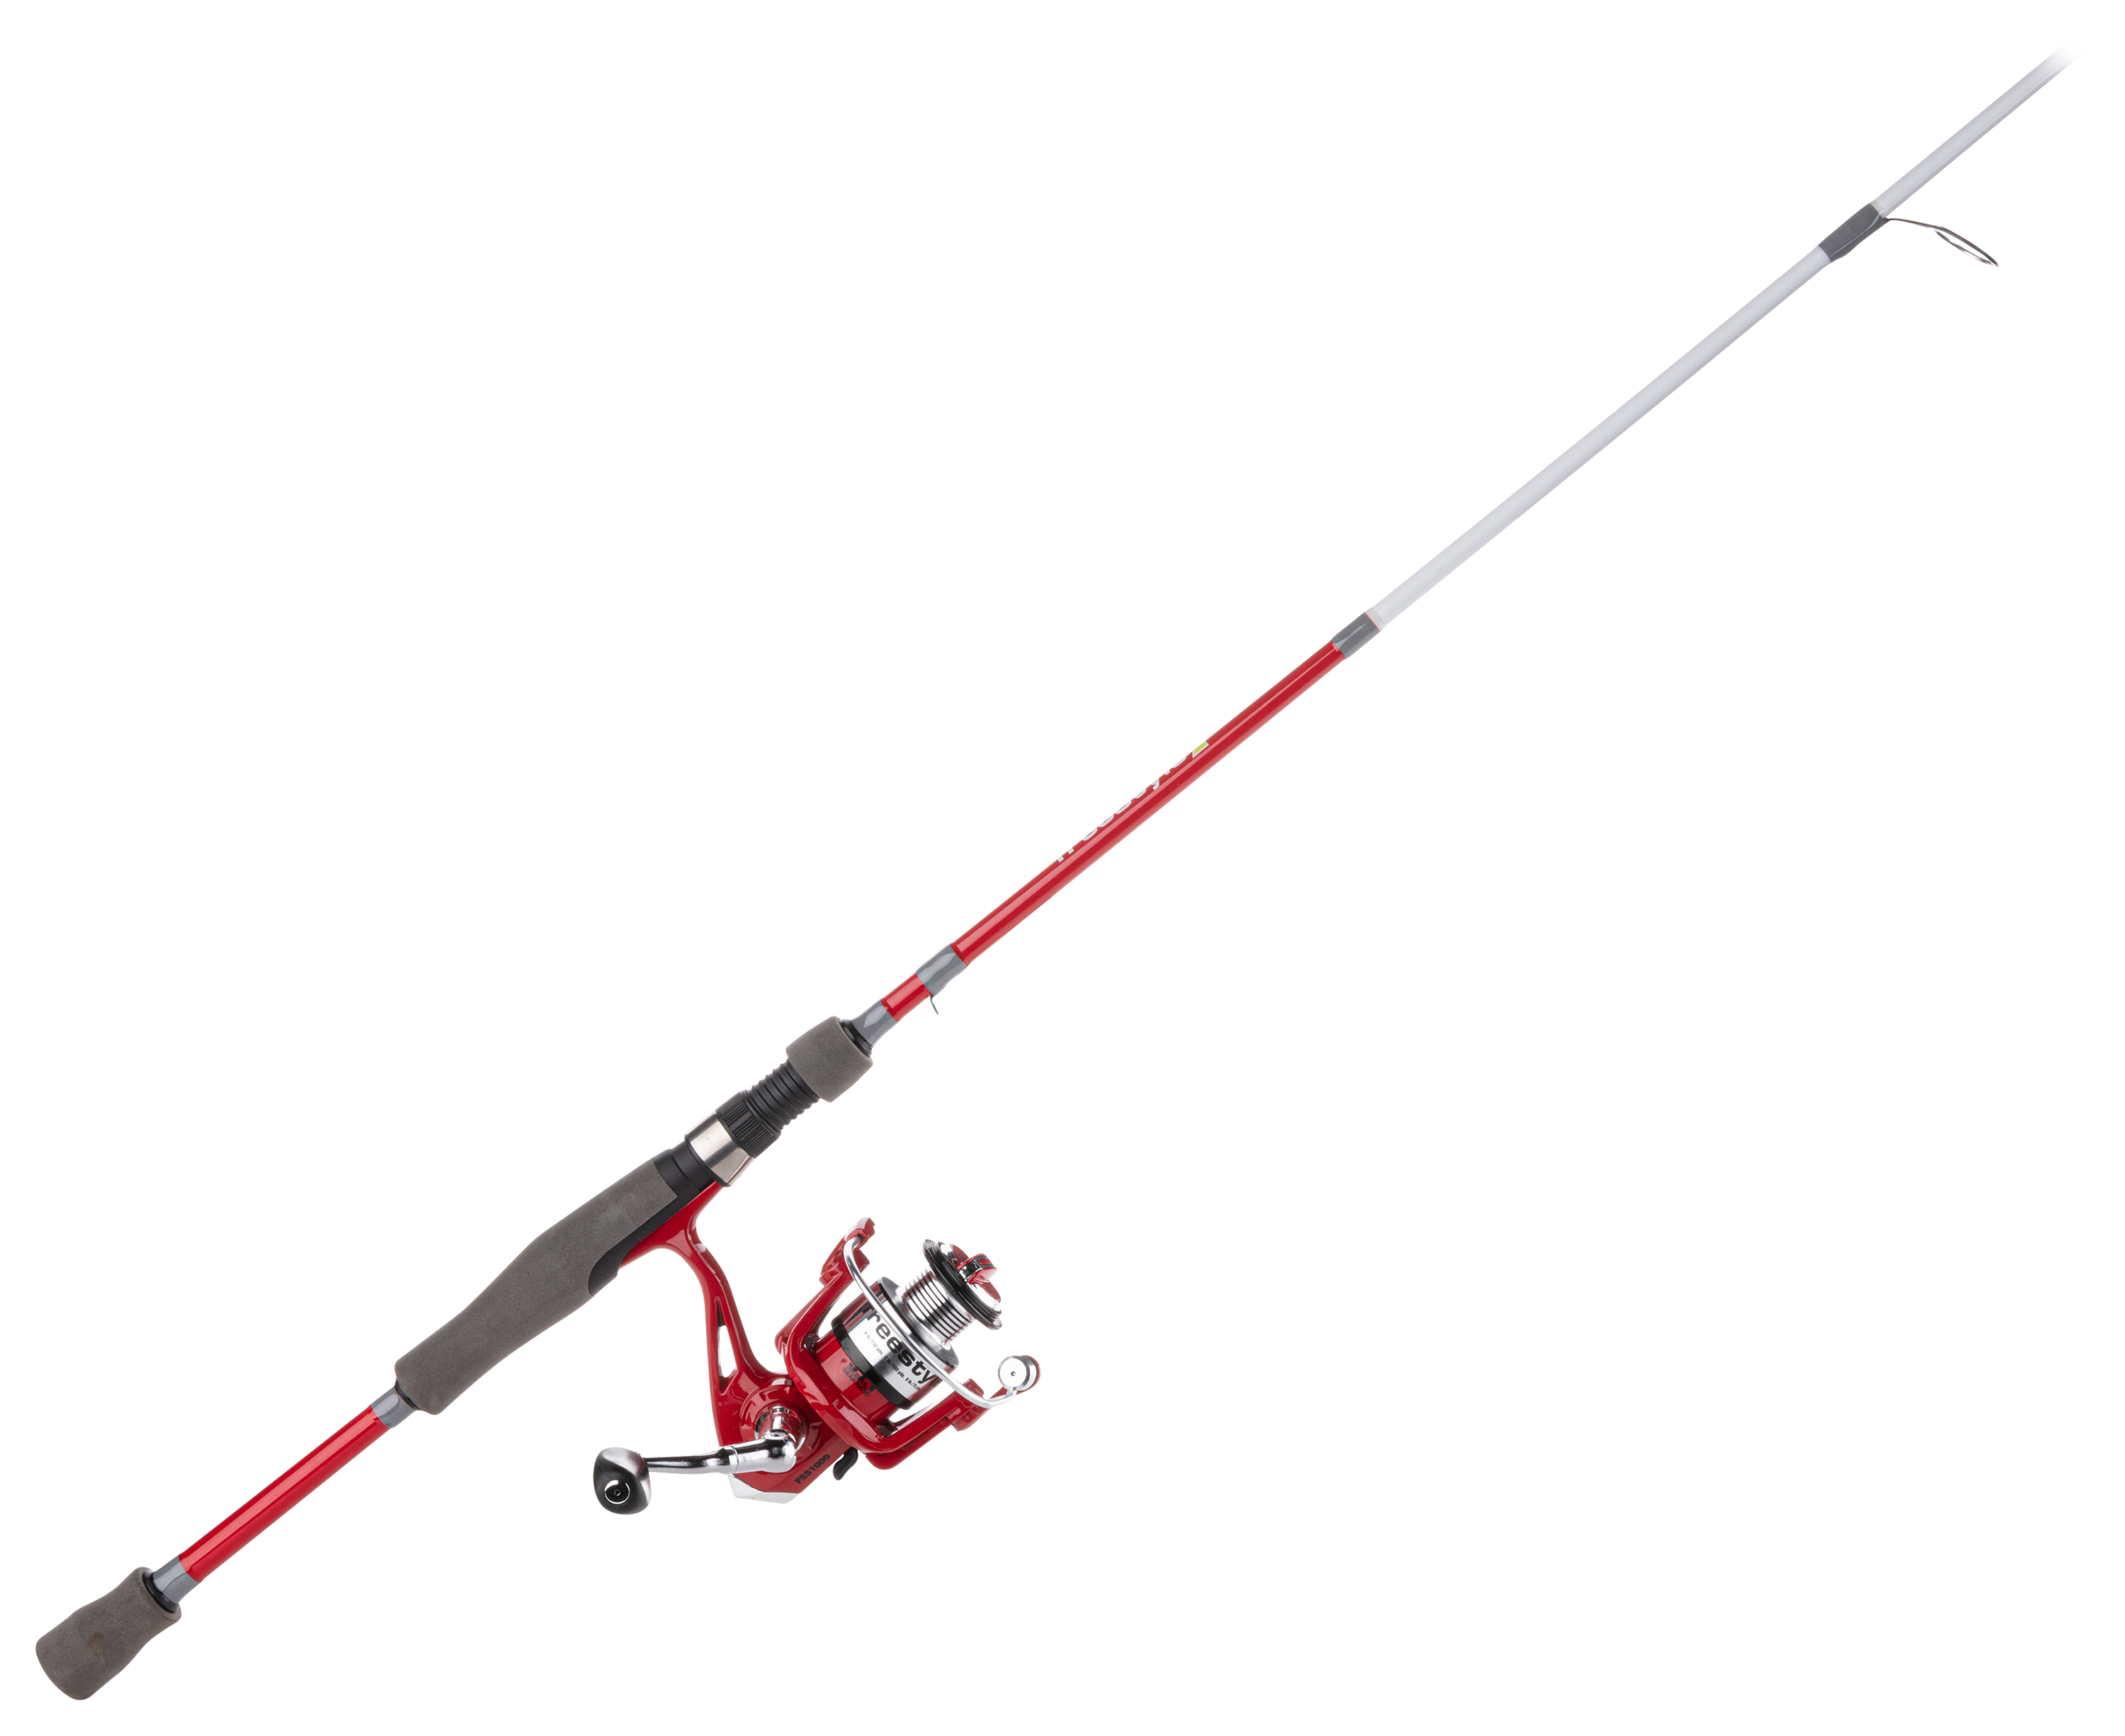 Ready to Fish' 10' Lite Spinning Combo / 6# line wt.